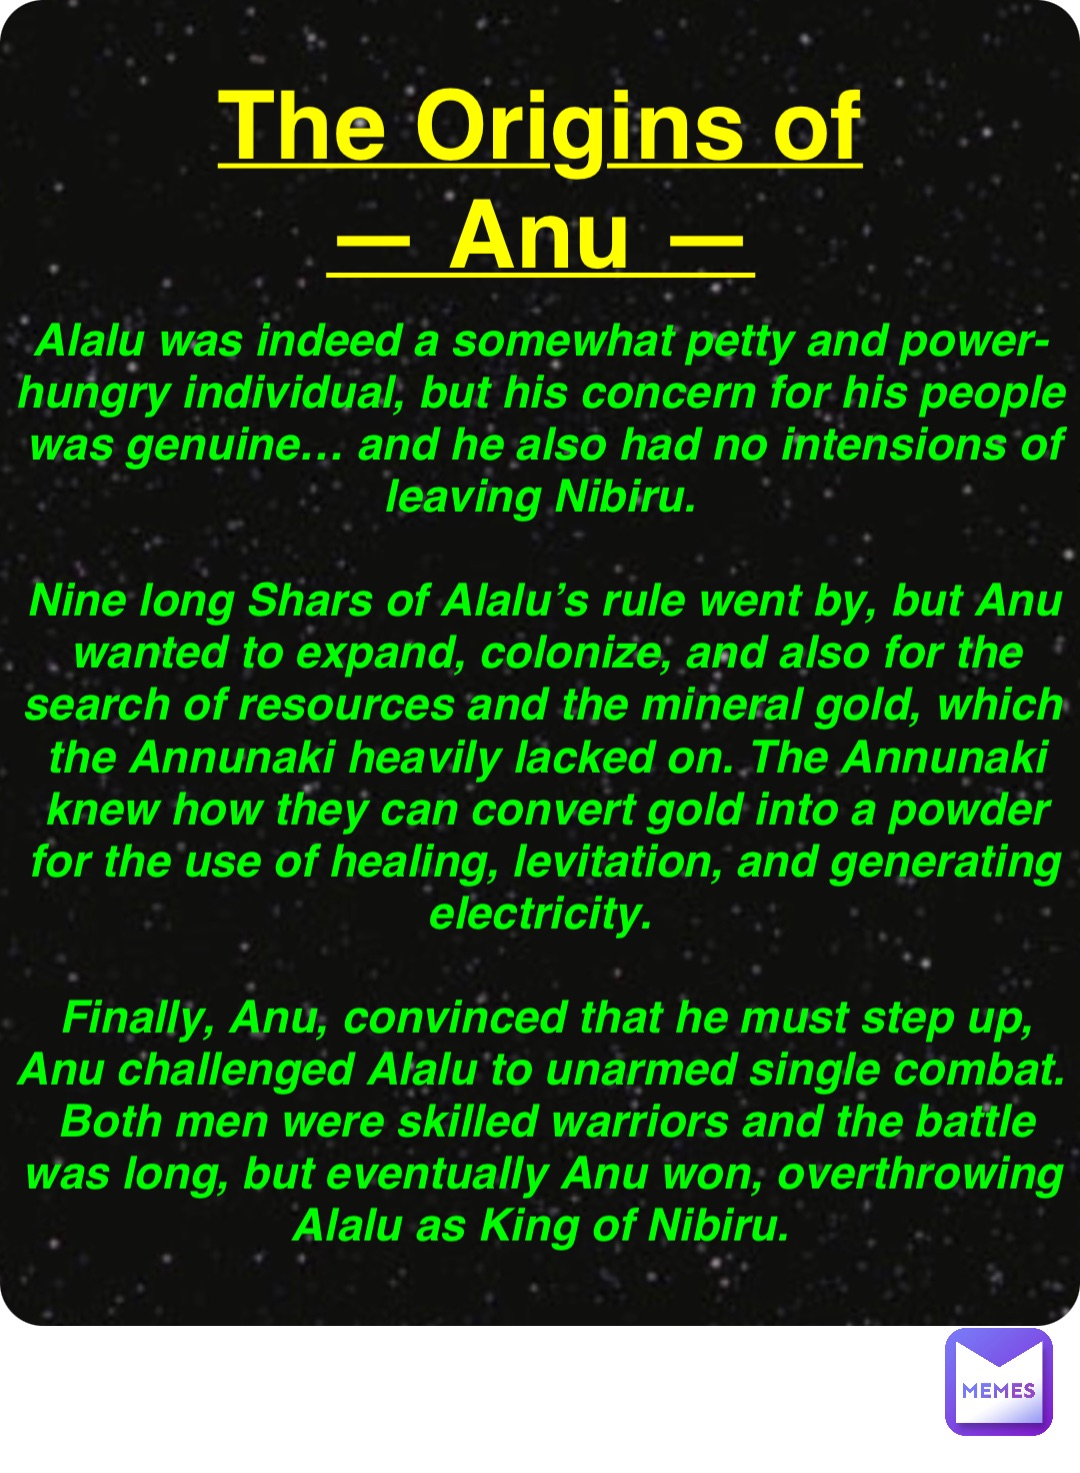 Double tap to edit The Origins of
— Anu — Alalu was indeed a somewhat petty and power-hungry individual, but his concern for his people was genuine… and he also had no intensions of leaving Nibiru.

Nine long Shars of Alalu’s rule went by, but Anu wanted to expand, colonize, and also for the search of resources and the mineral gold, which the Annunaki heavily lacked on. The Annunaki knew how they can convert gold into a powder for the use of healing, levitation, and generating electricity.

Finally, Anu, convinced that he must step up, Anu challenged Alalu to unarmed single combat. Both men were skilled warriors and the battle was long, but eventually Anu won, overthrowing Alalu as King of Nibiru.